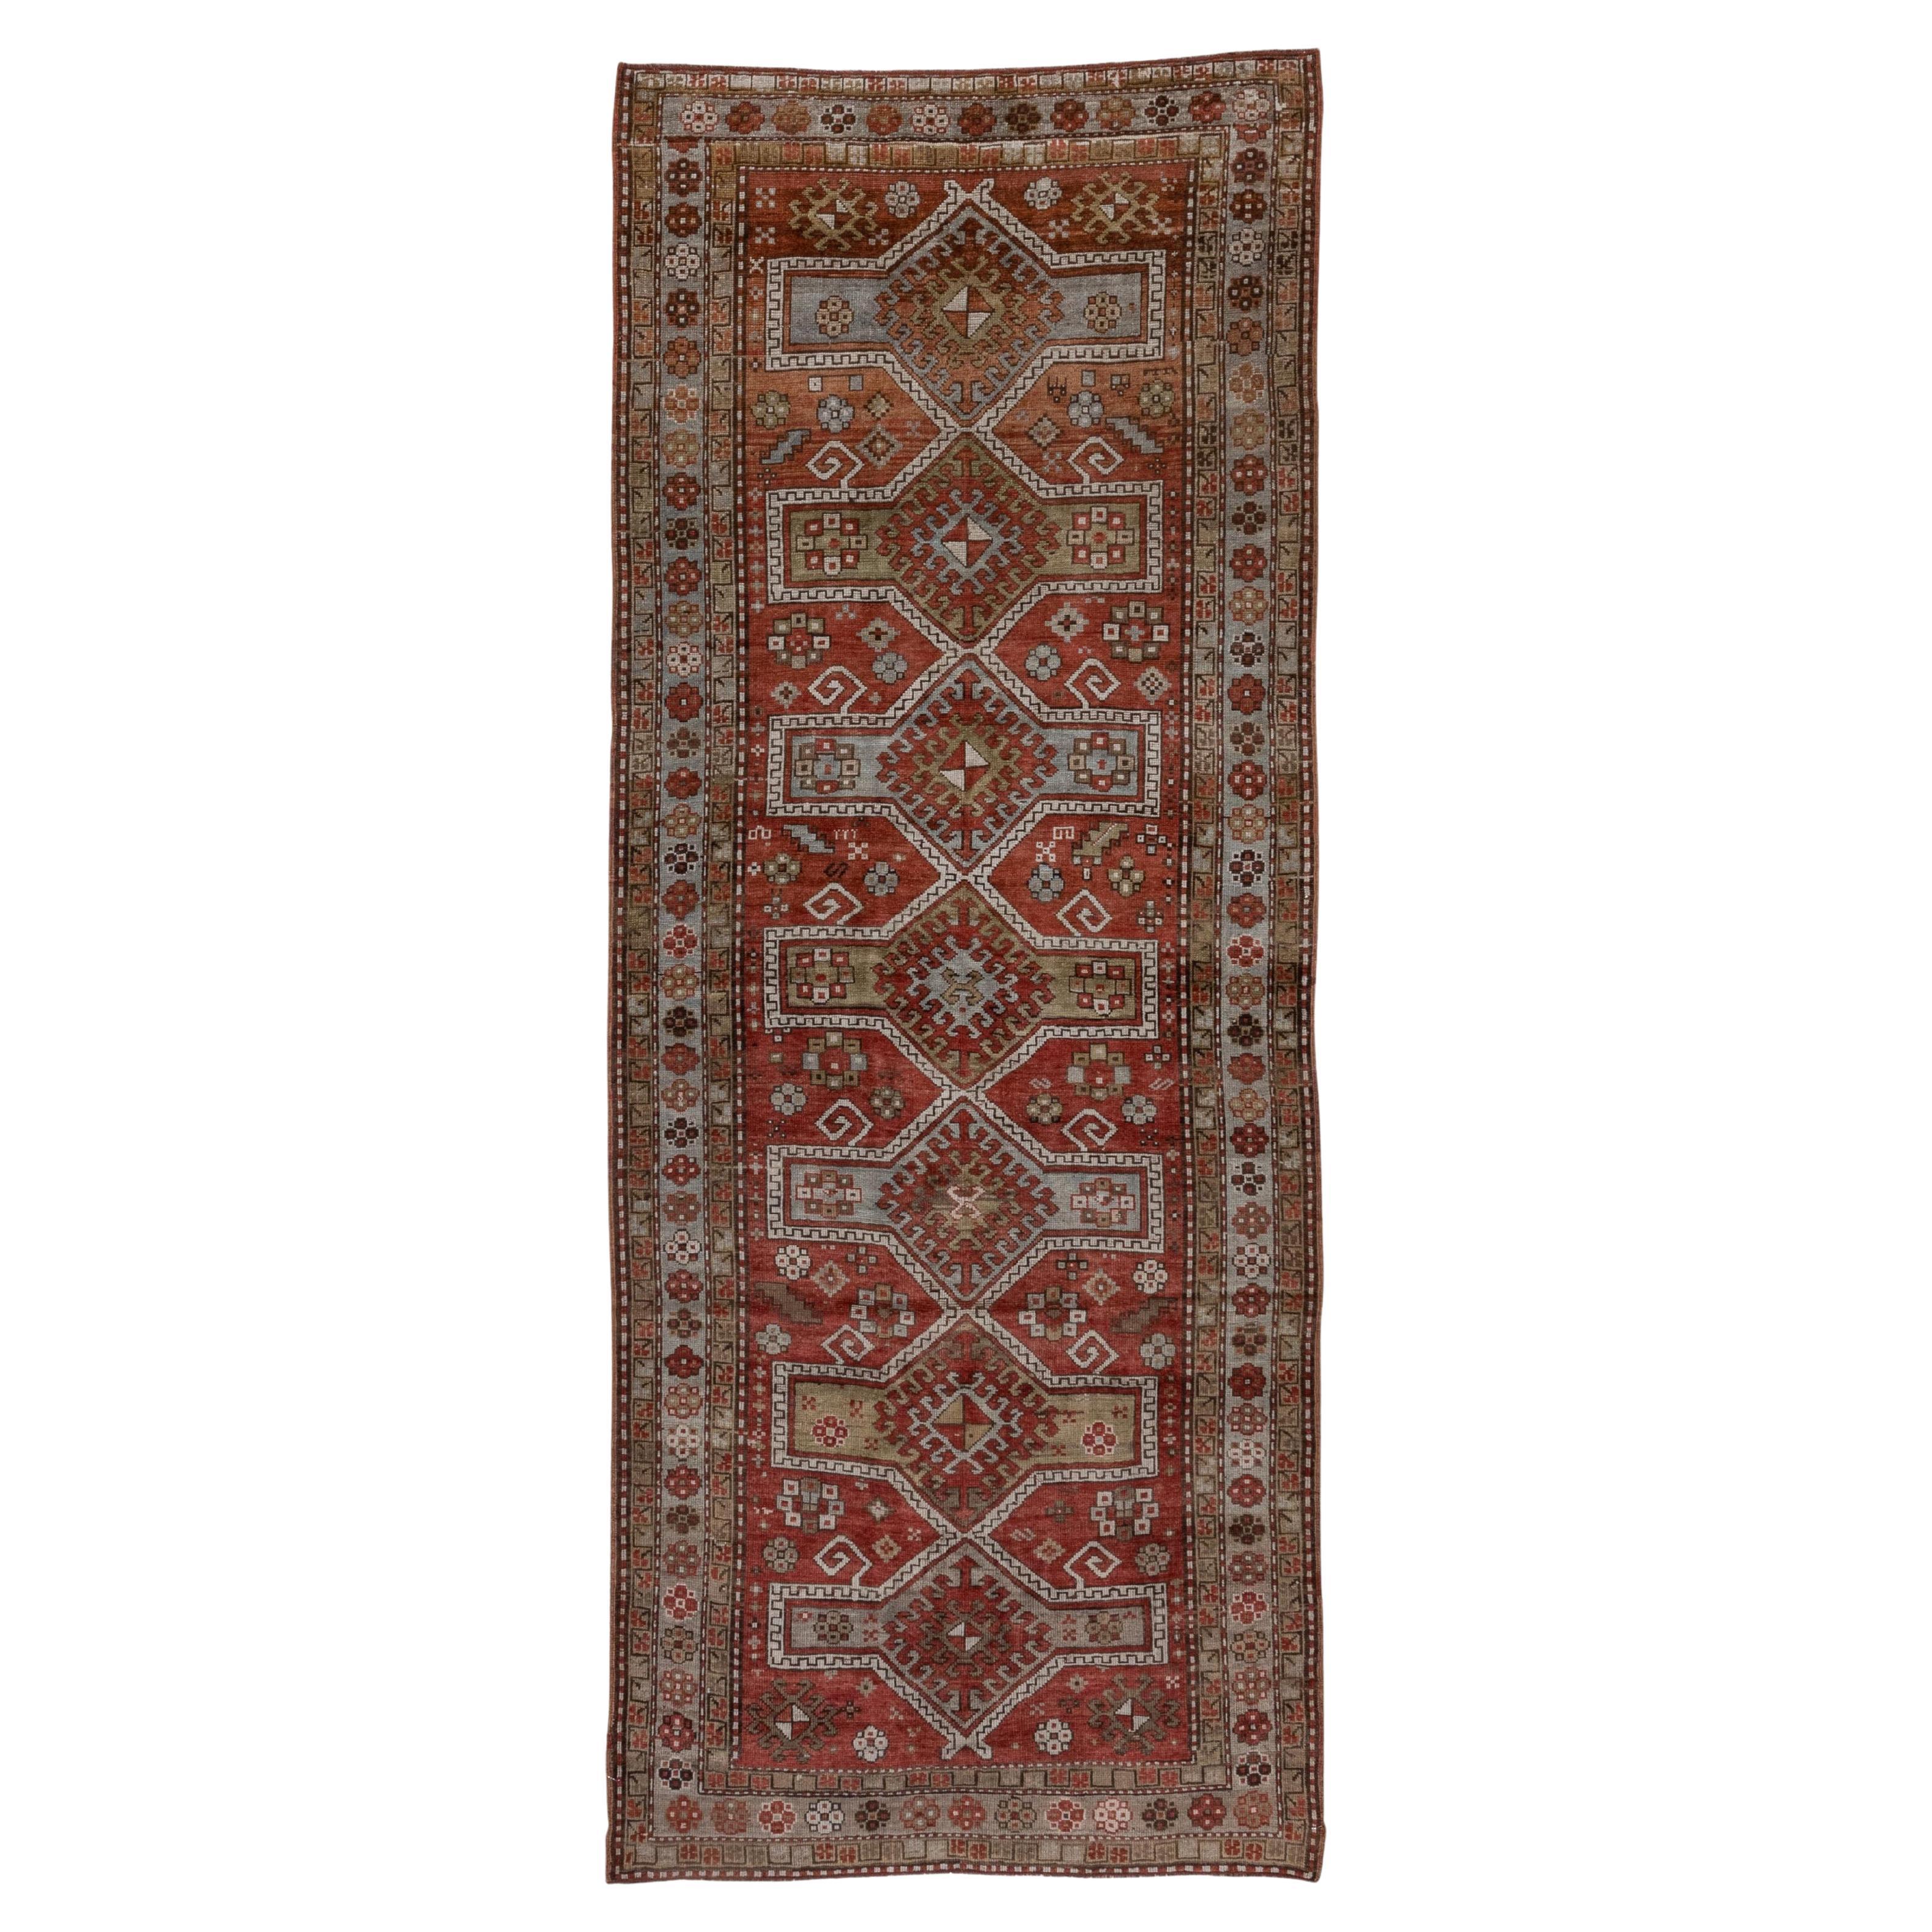 Fine Antique Caucasian Wide Runner, Red Field, Shiny Gray Borders & Olive Tones